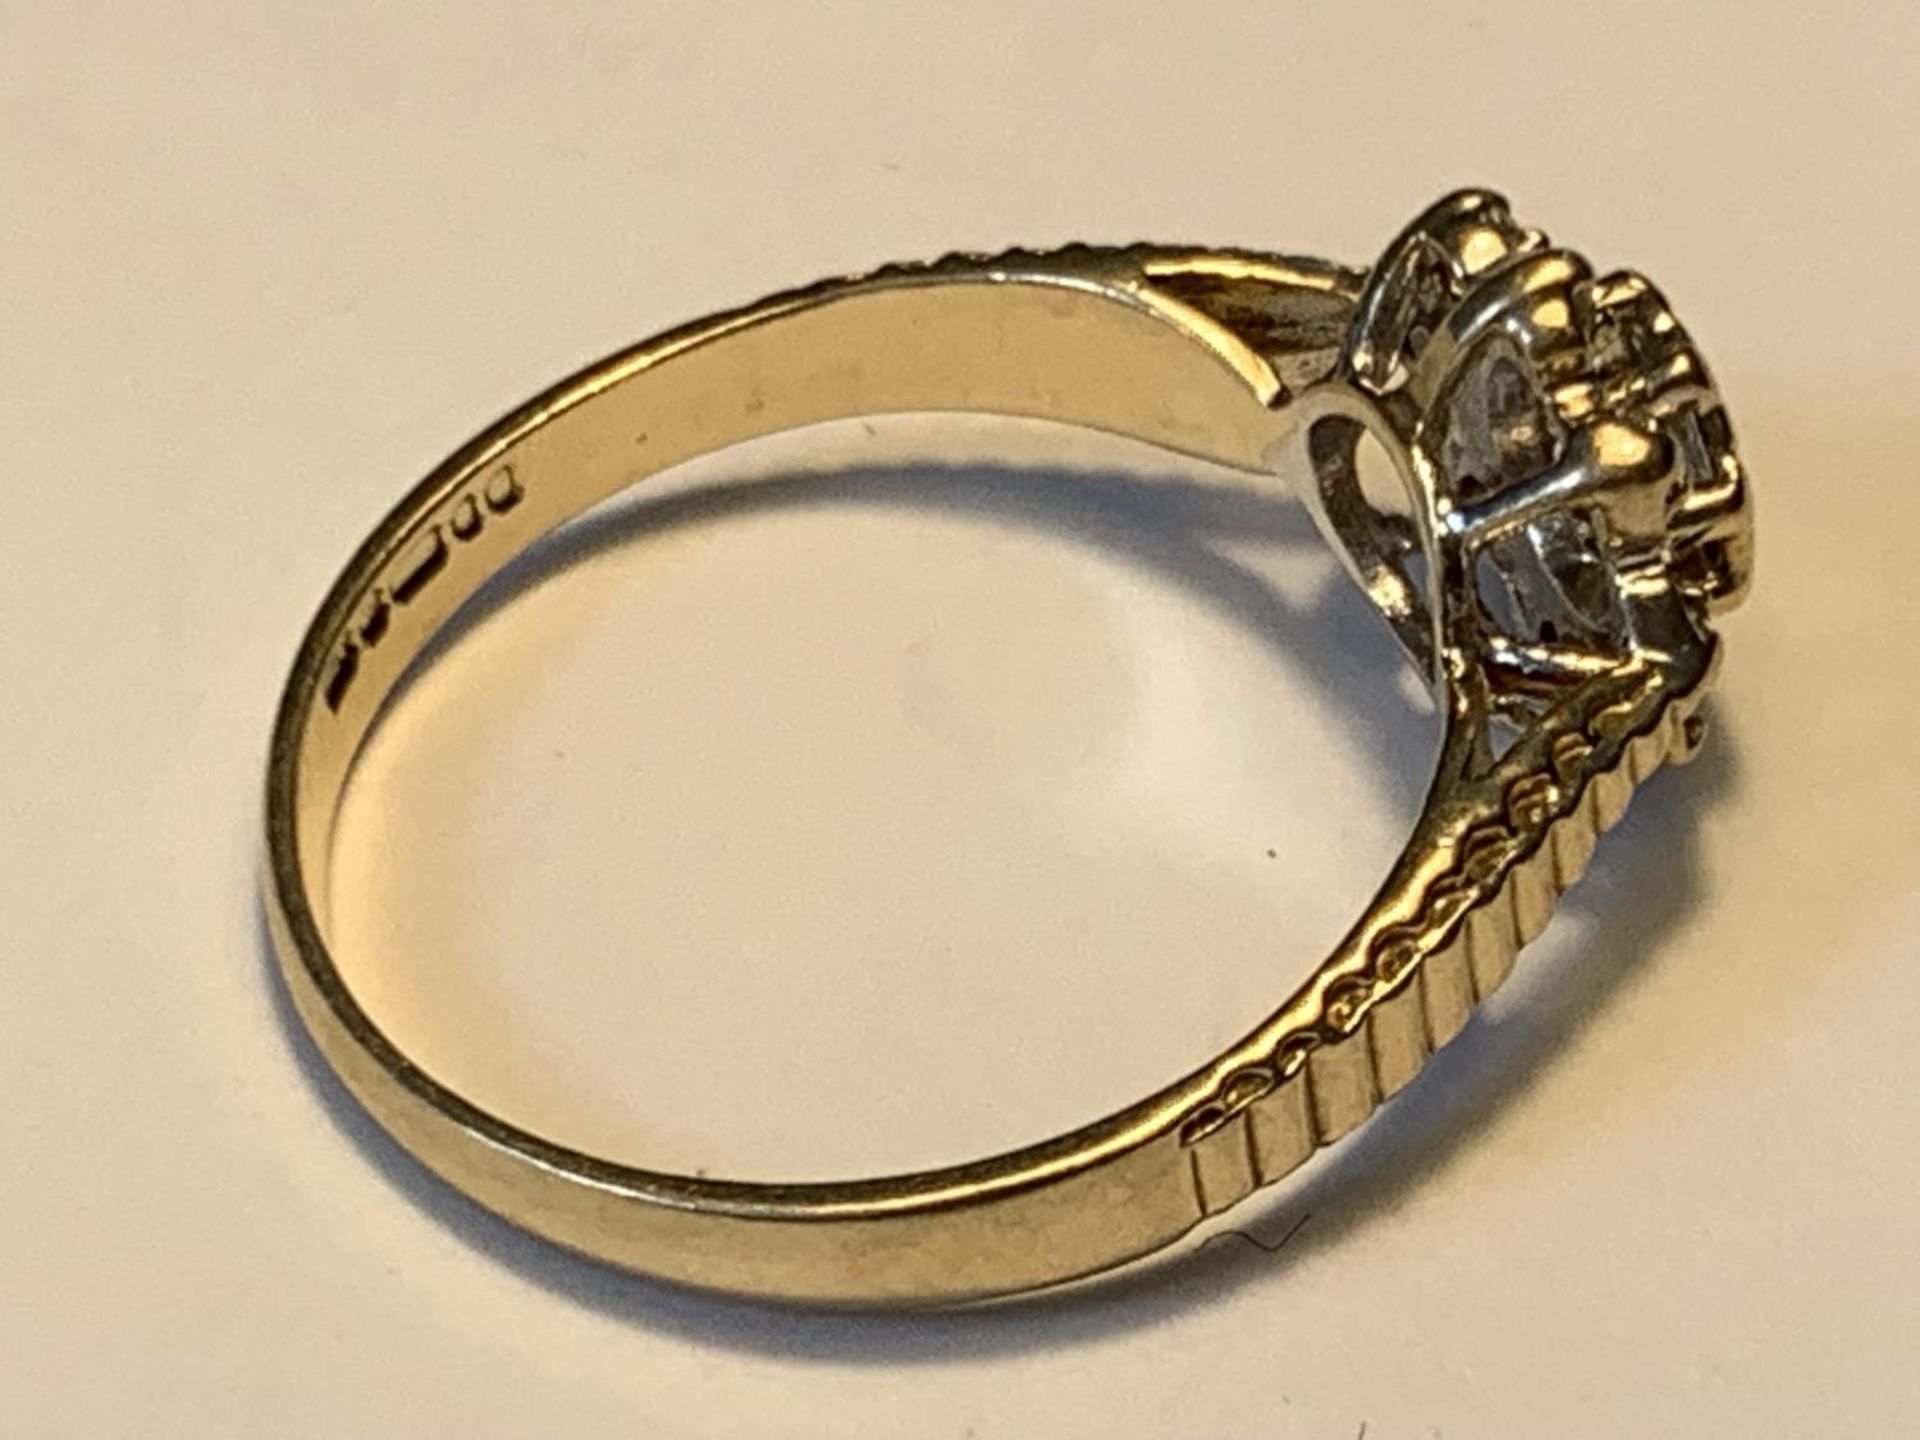 A 9 CARAT GOLD DIAMOND RING IN THE STYLE OF A DAISY SIZE K - Image 2 of 3